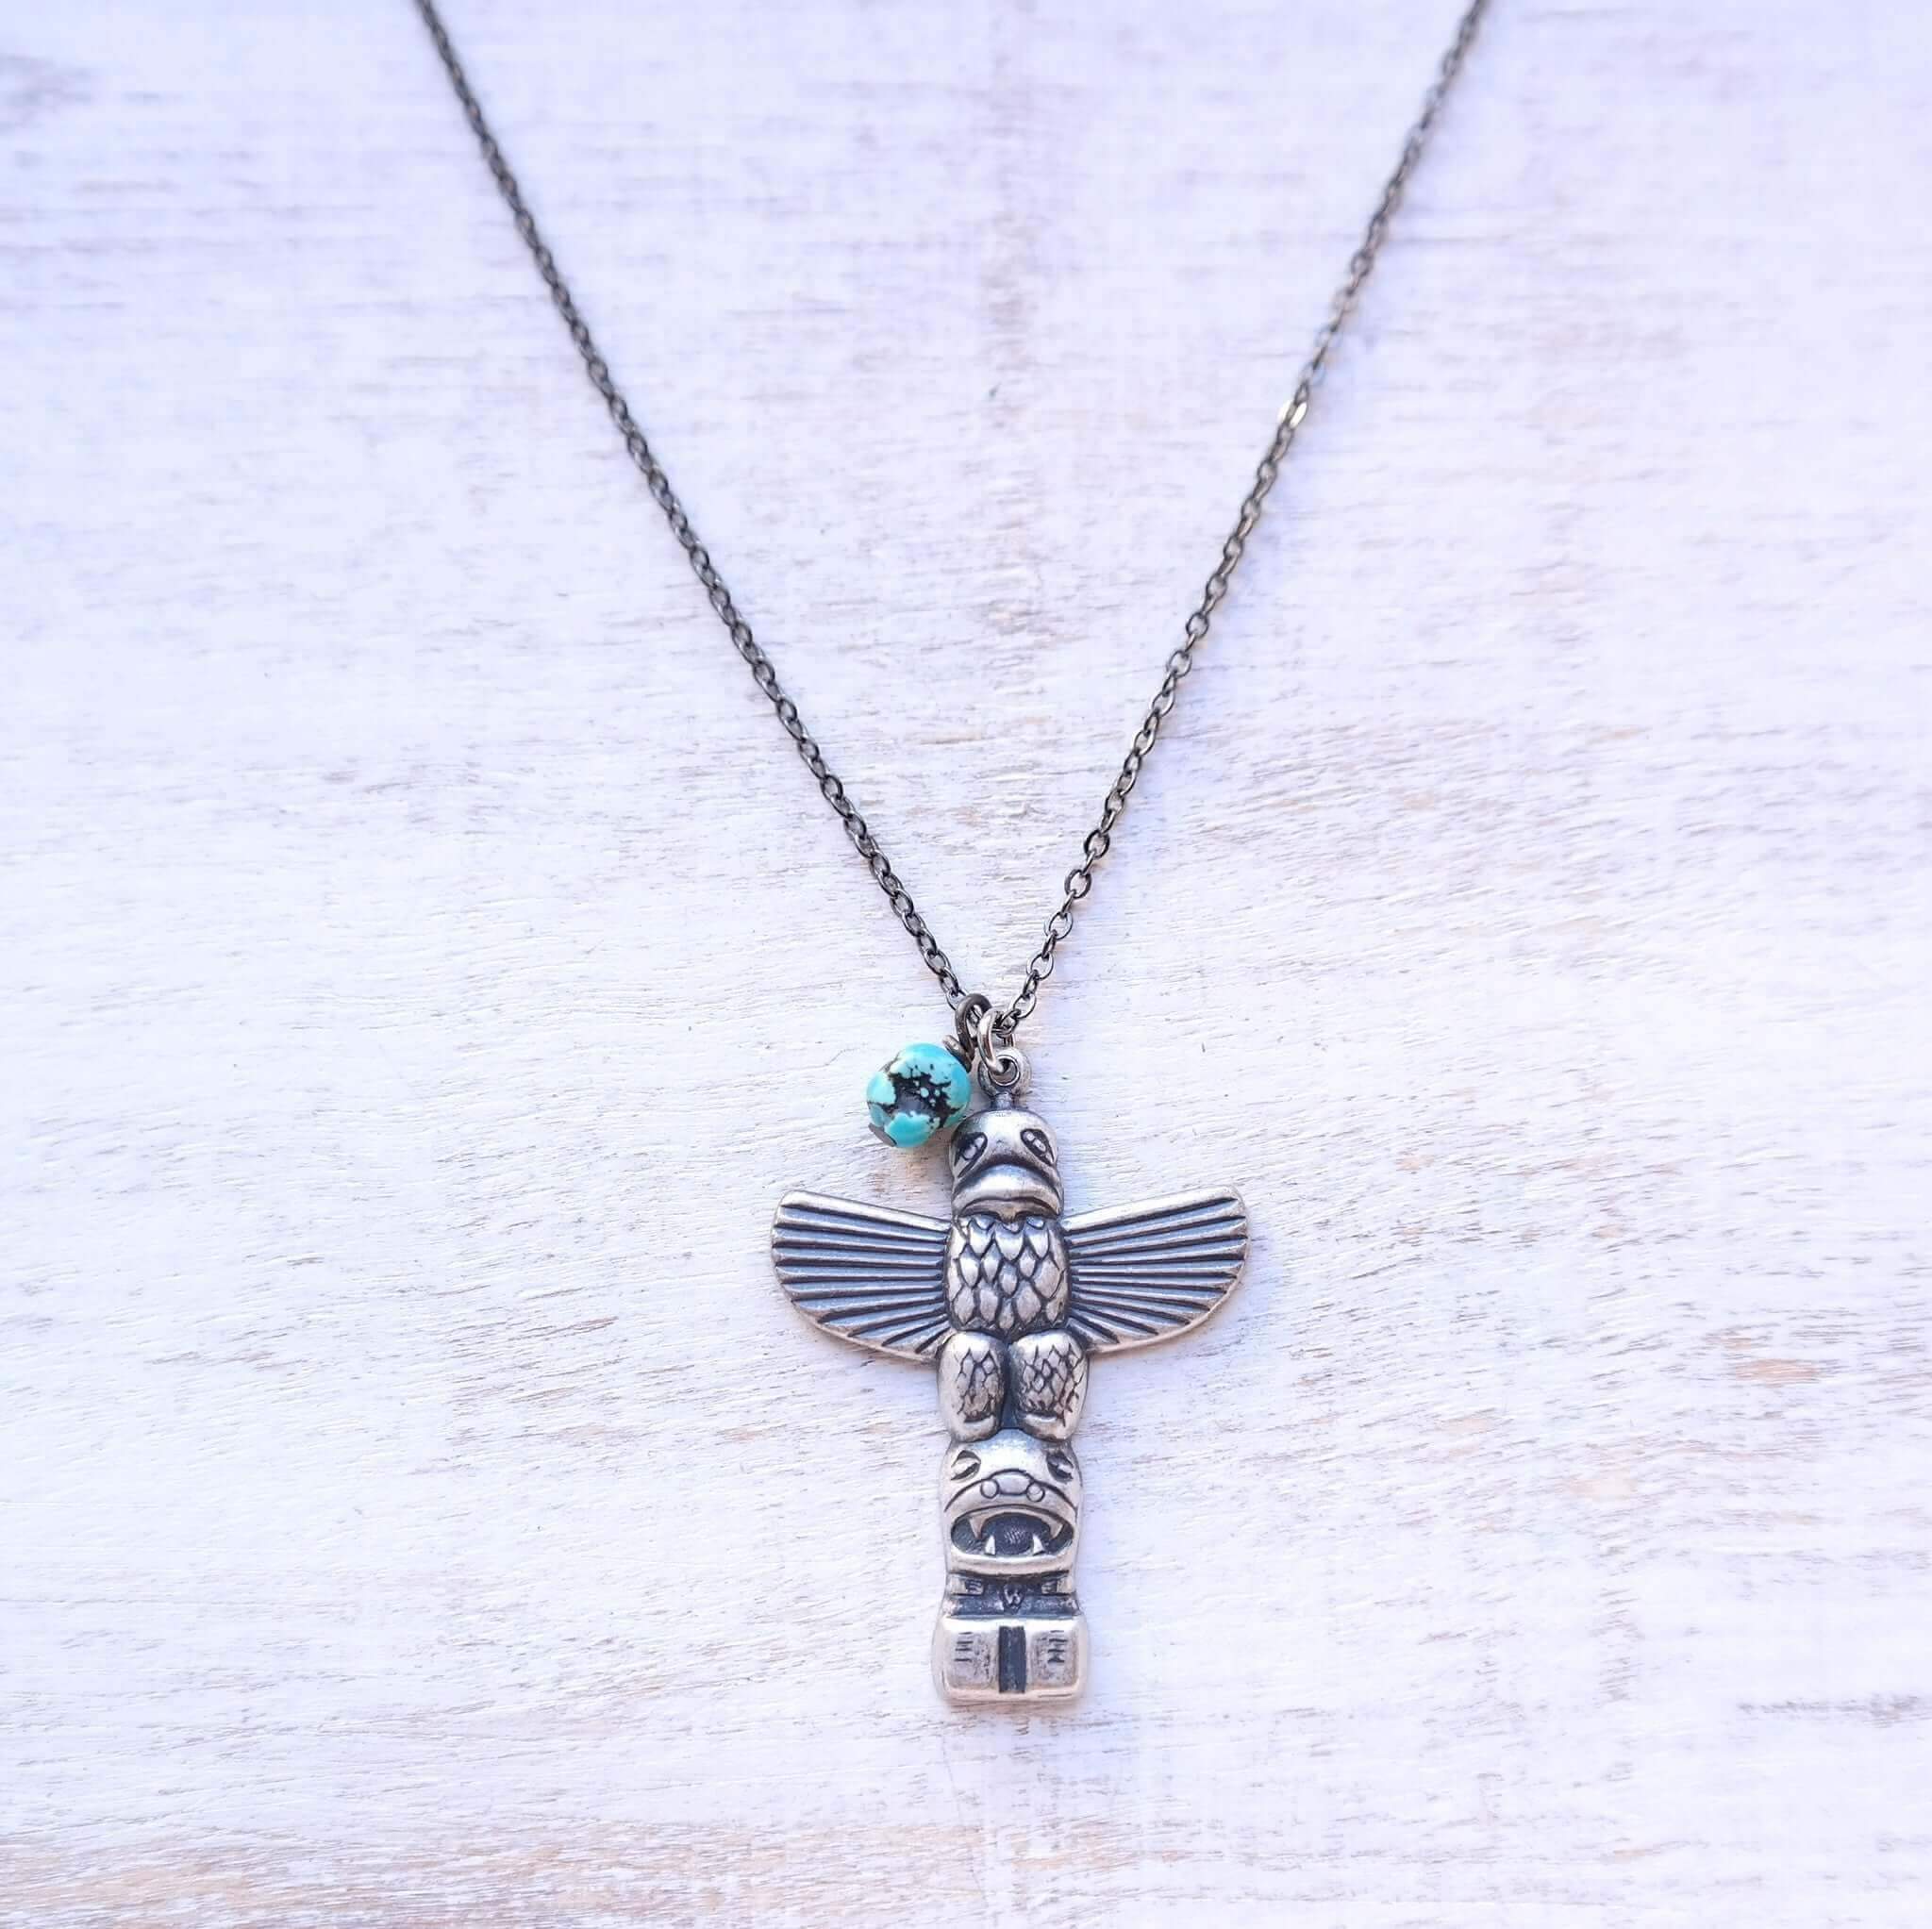 Totem Pole Necklace with Turquoise - Gypsy Soul Jewellery